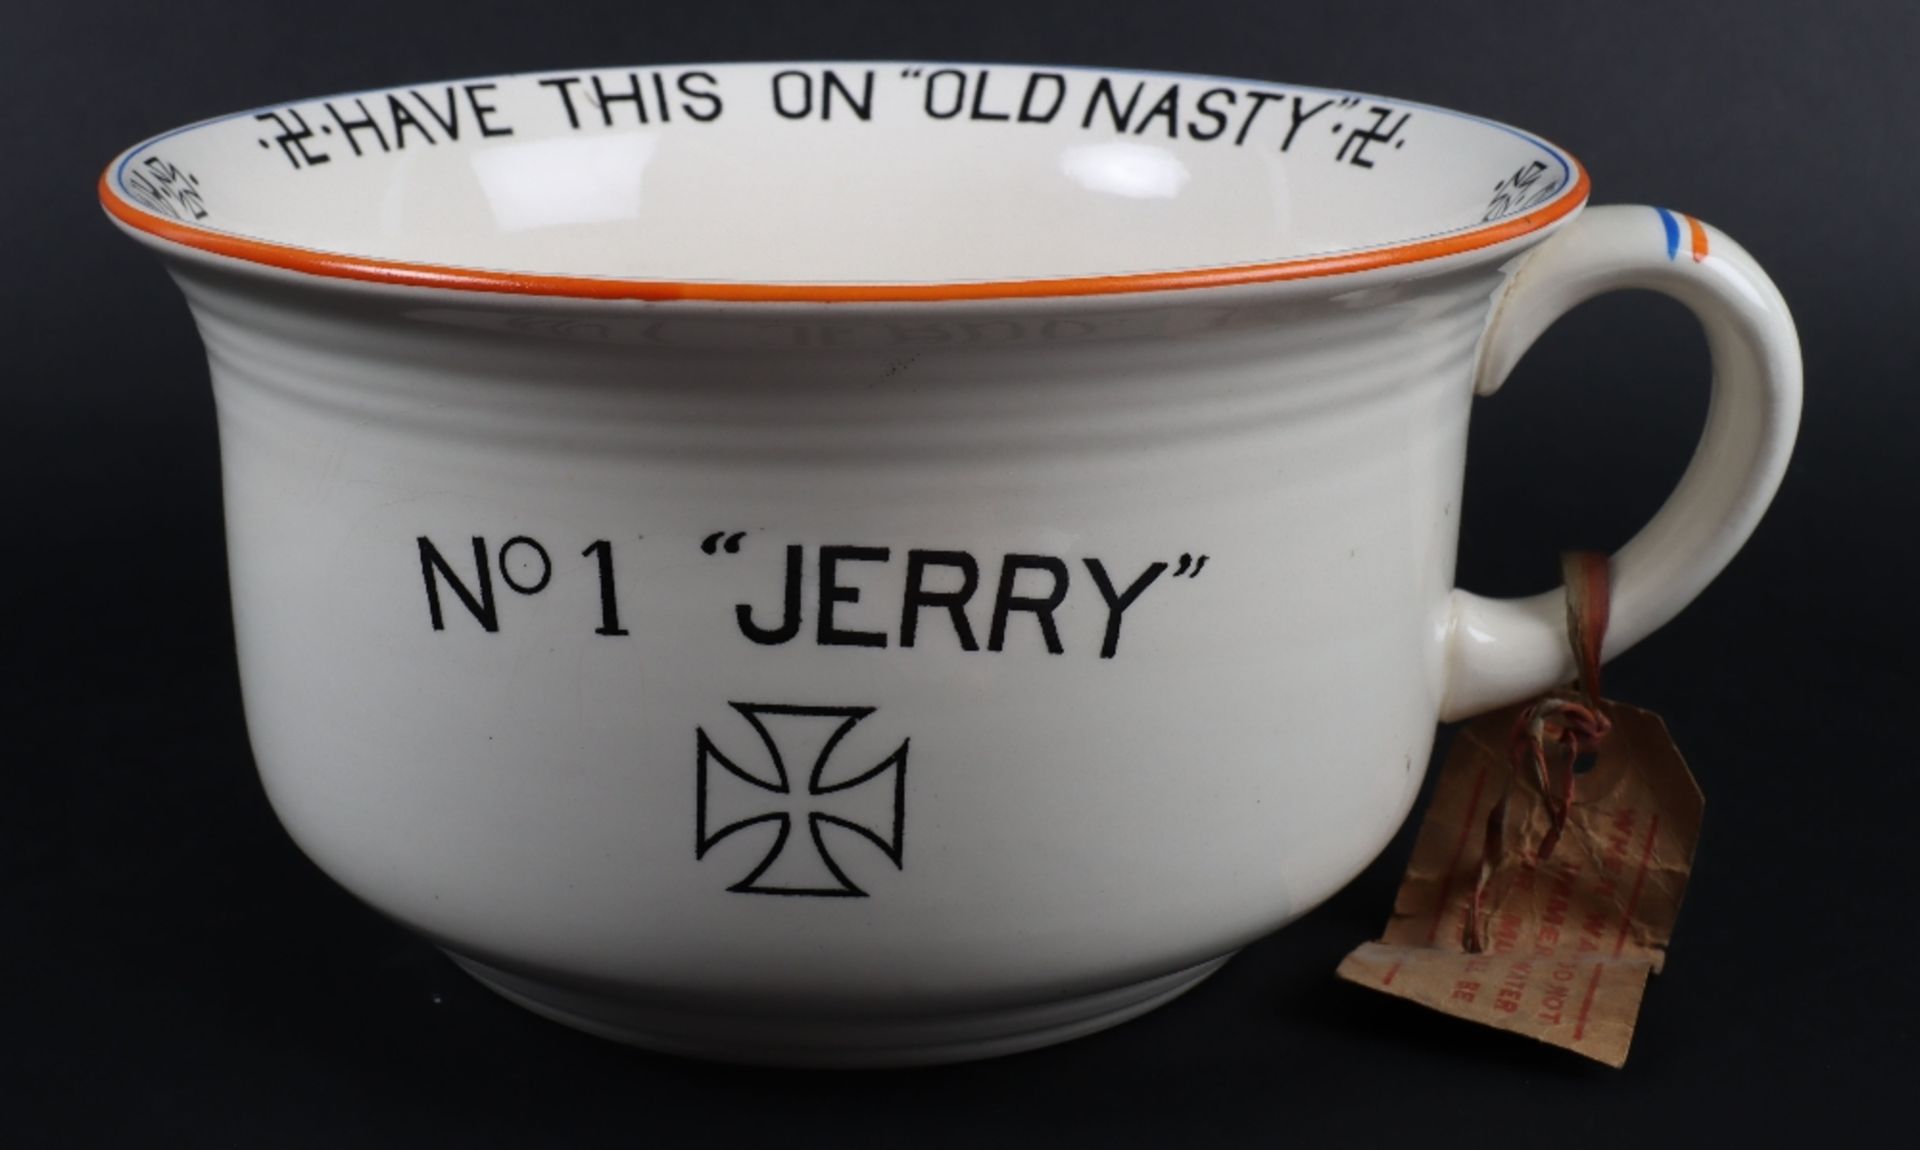 Fieldings Crown Devon WW2 Novelty Musical Chamber Pot, ‘No. 1 Jerry’, Have This On Old Nasty - Image 2 of 5